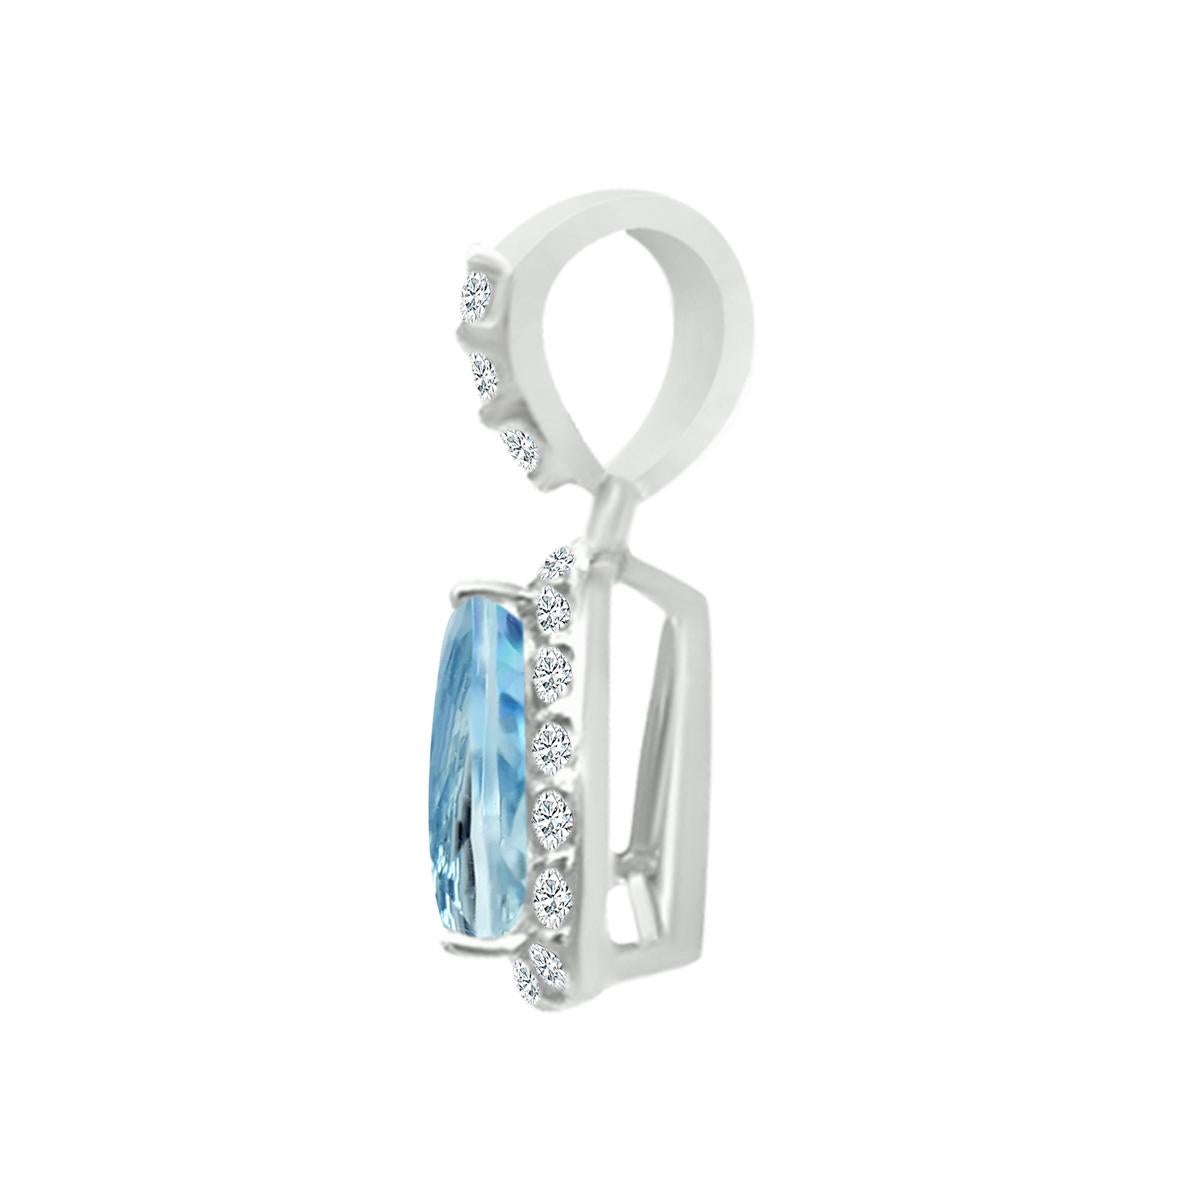 A Blue Aquamarine Gemstone In A Tasteful Setting, Is A Centerpiece Of This Pendant.
This Pendant Contains A Natural 7mm Trillion Cut Aquamarine Gemstone. And Is Surrounded By Round Diamonds.
This March Birthstone Pendant Is Crafted In 14K White